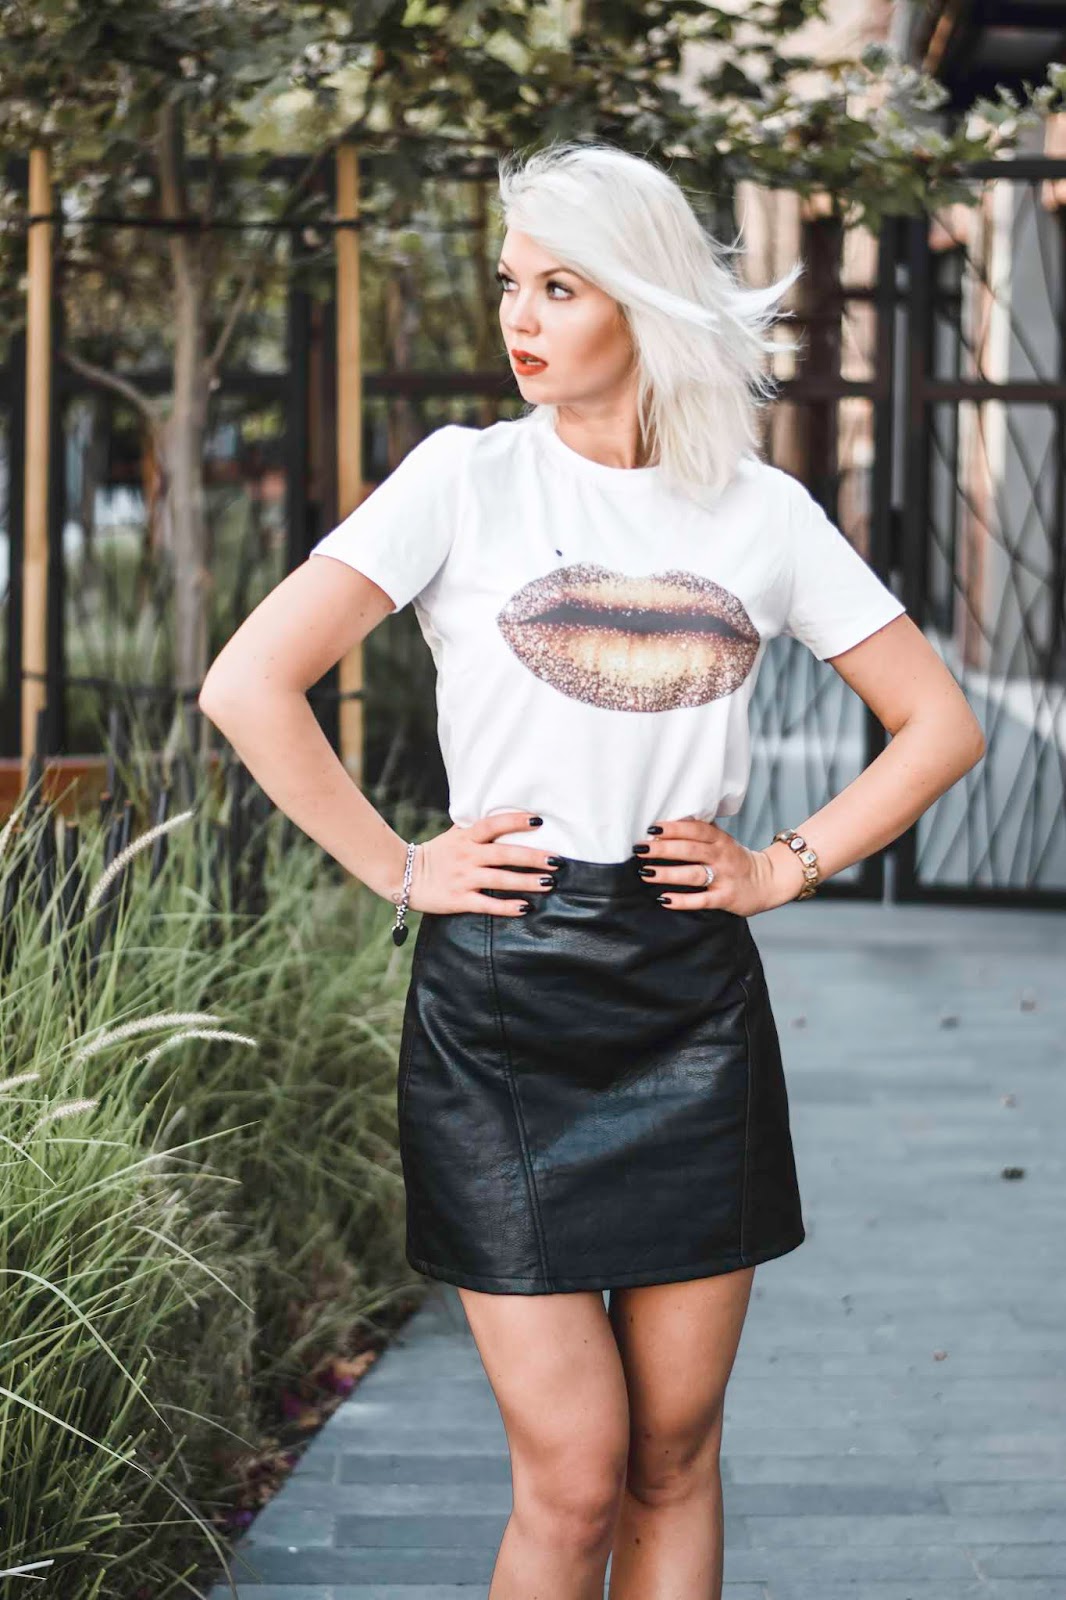 how to style a graphic tee